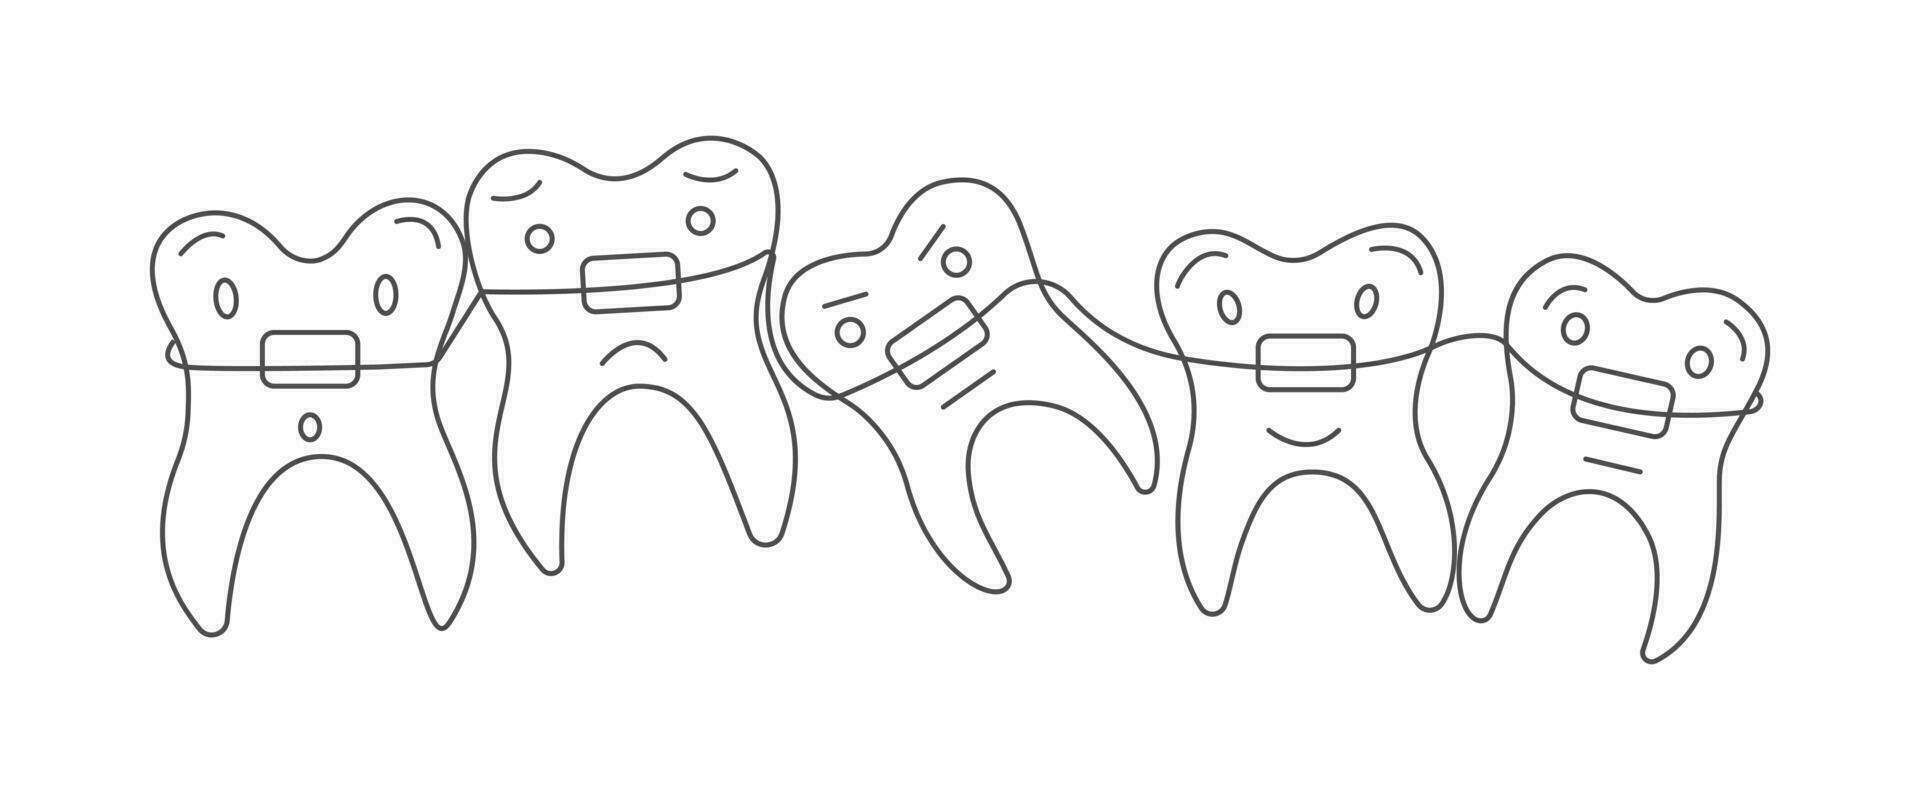 Doodle cute teeth with braces. Dental care. Oral hygiene concept for children for pediatric dentistry. Teeth cleaning and prevention. Teeth cleaning and prevention. Vector Hand draw illustration.